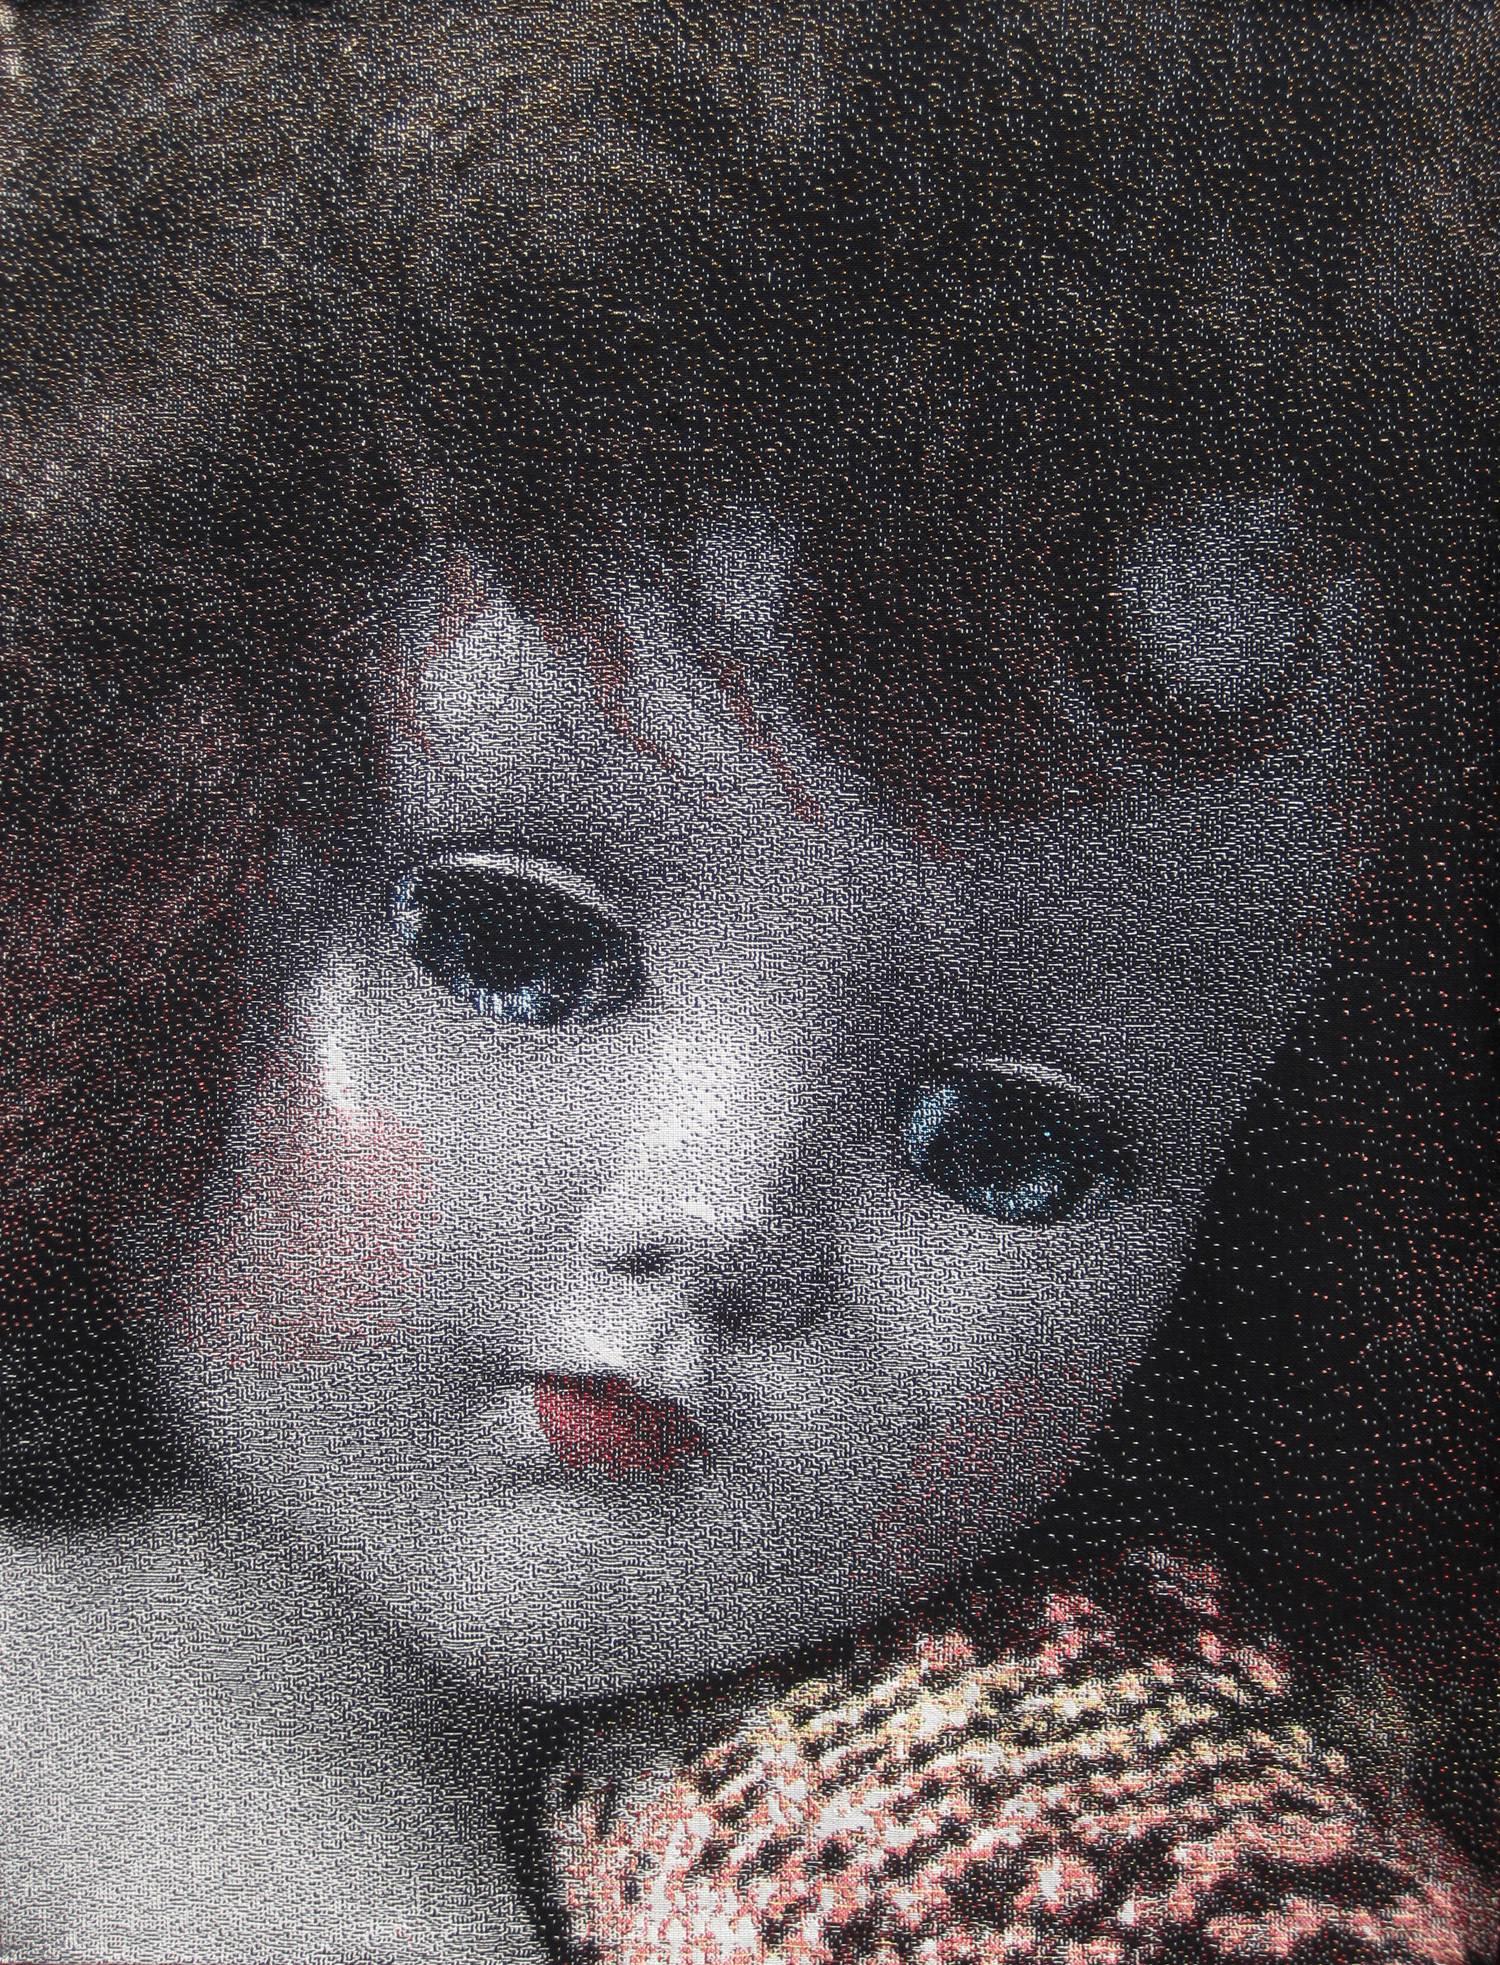 Doll Face Pillow - Mixed Media Art by Lia Cook